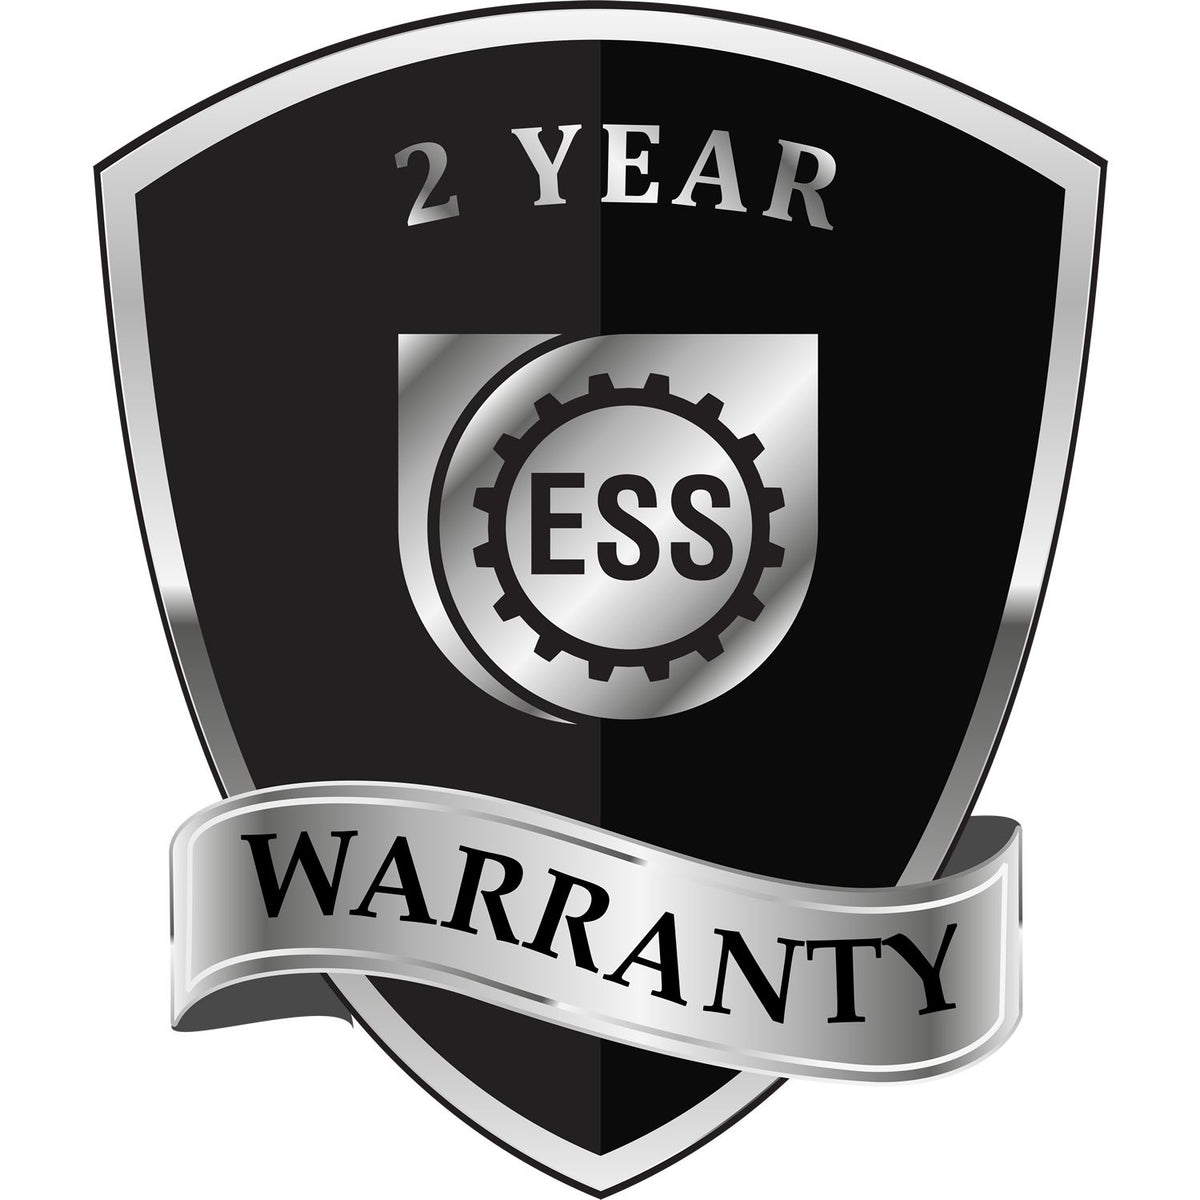 A black and silver badge or emblem showing warranty information for the Gift Alaska Geologist Seal